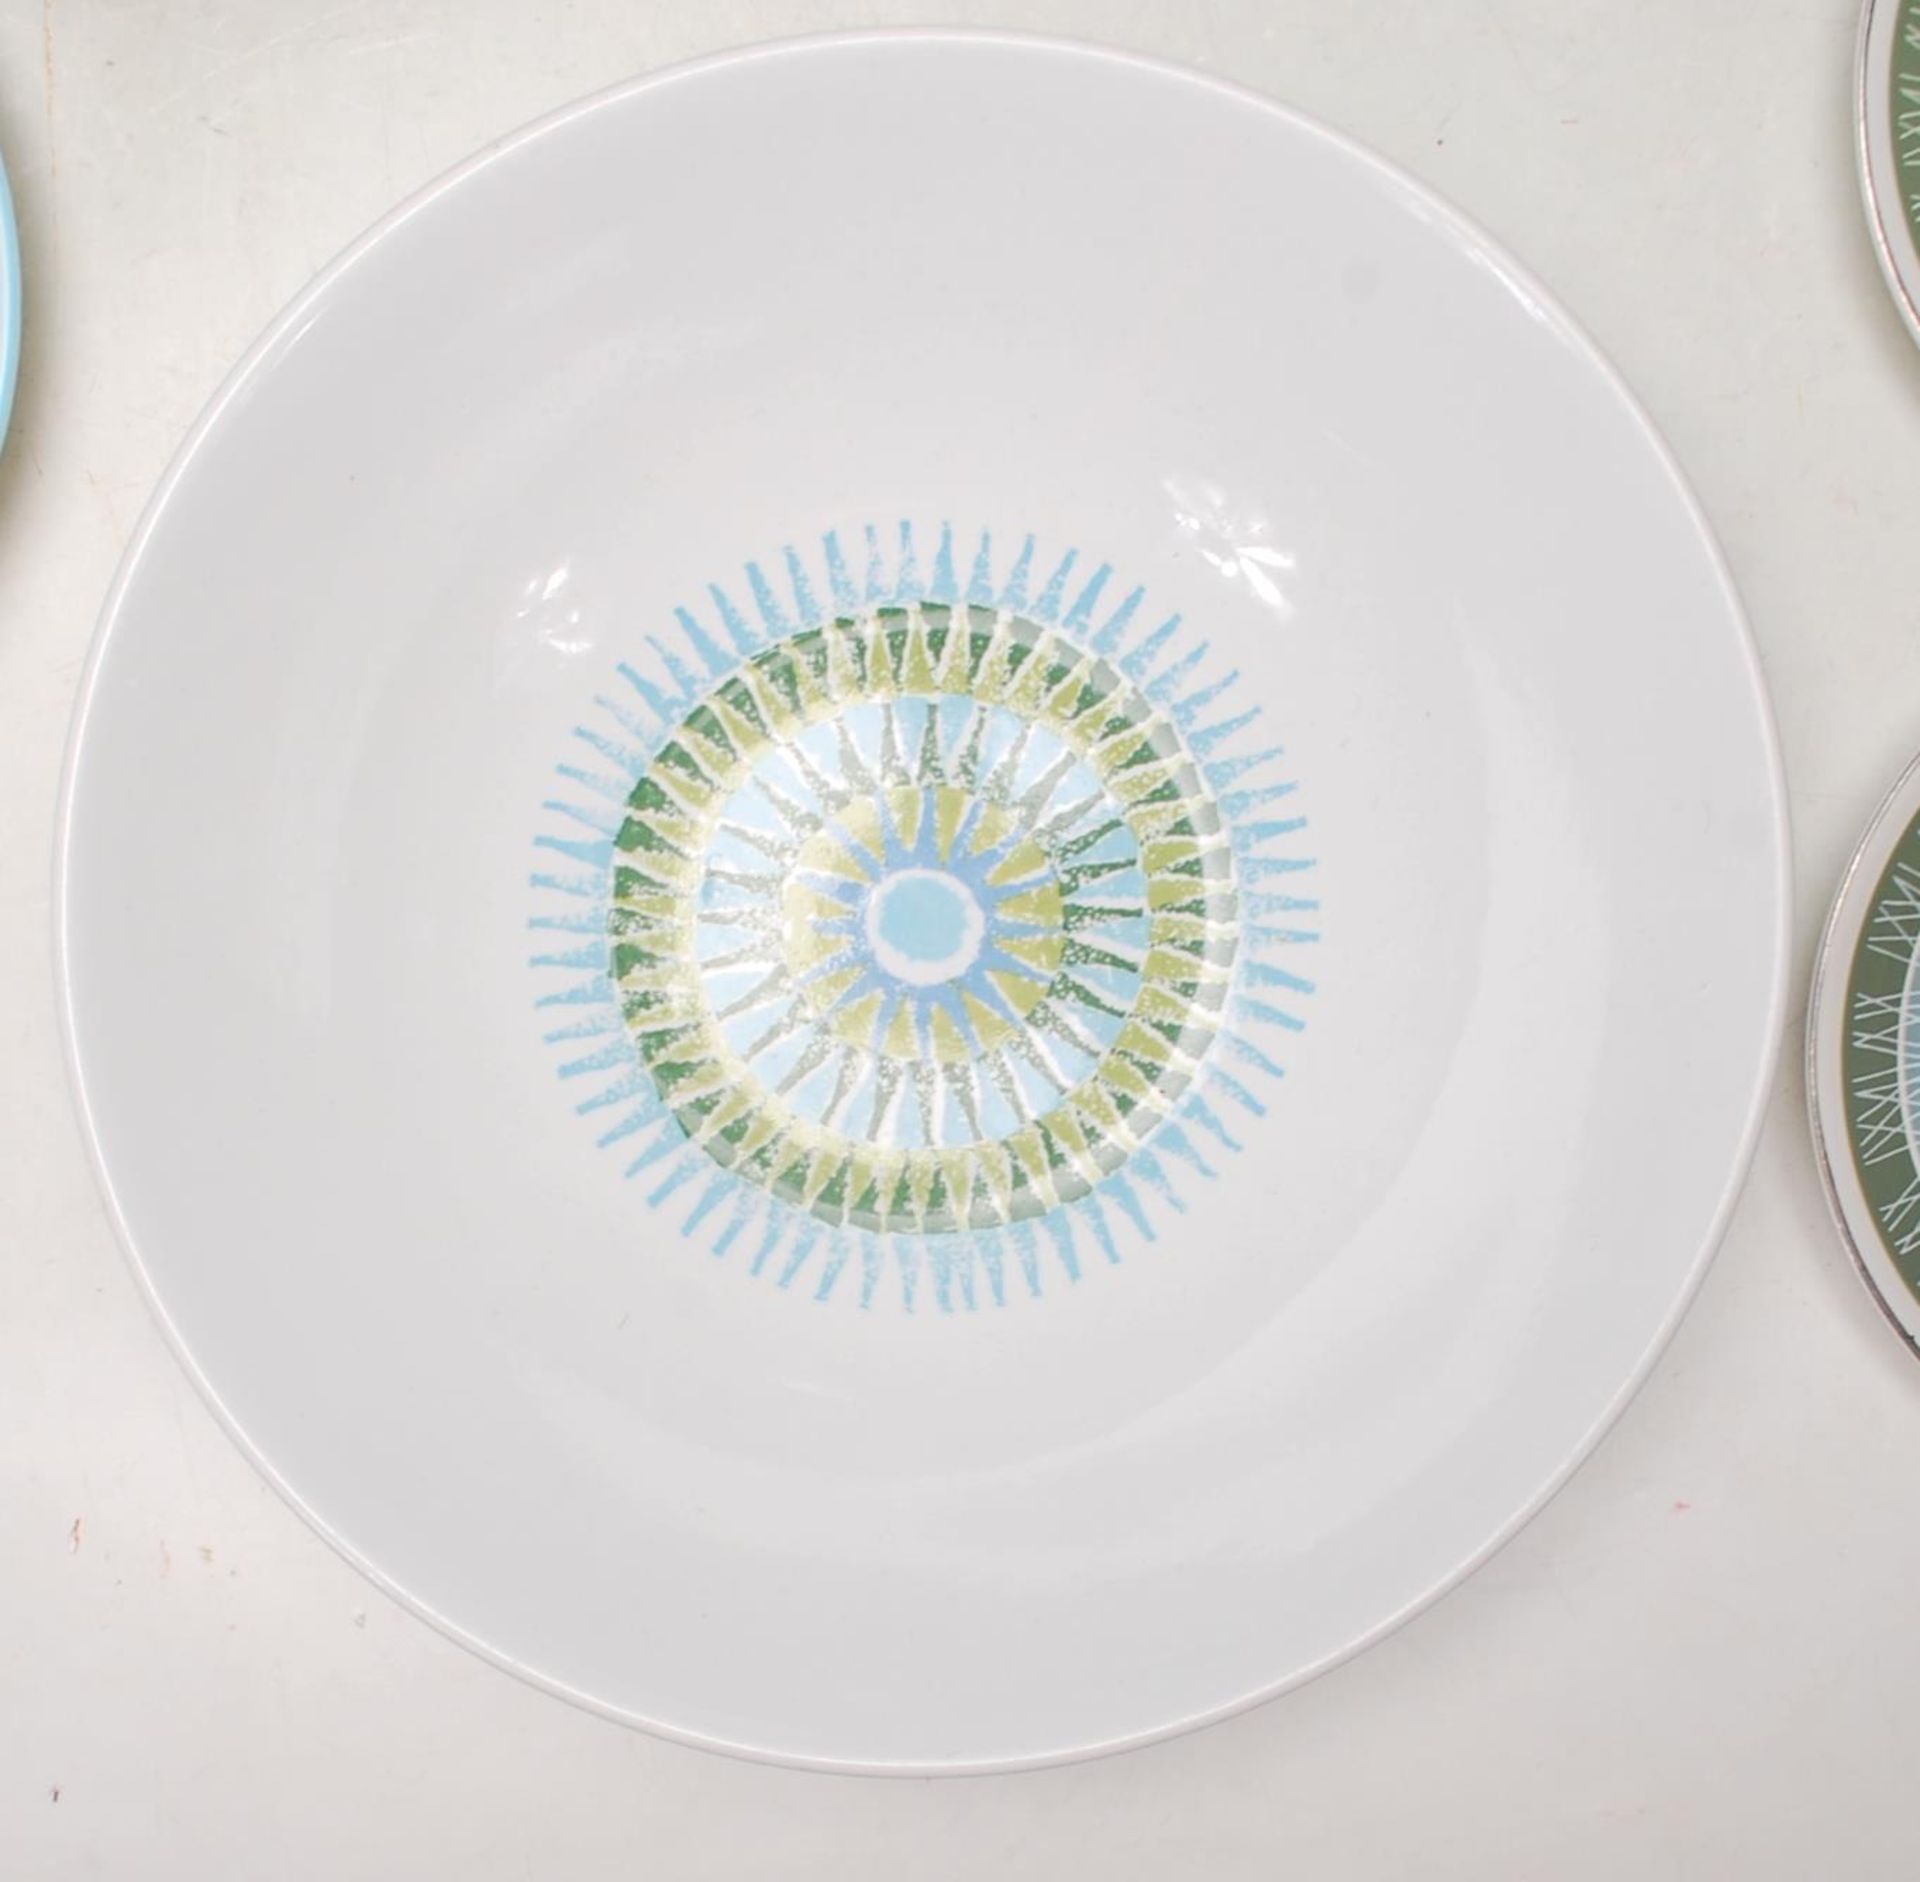 RETRO VINTAGE LATE 20TH CENTURY DINNER SERVICE BY MIDWINTER AND JG MEAKIN STUDIO. - Image 3 of 14